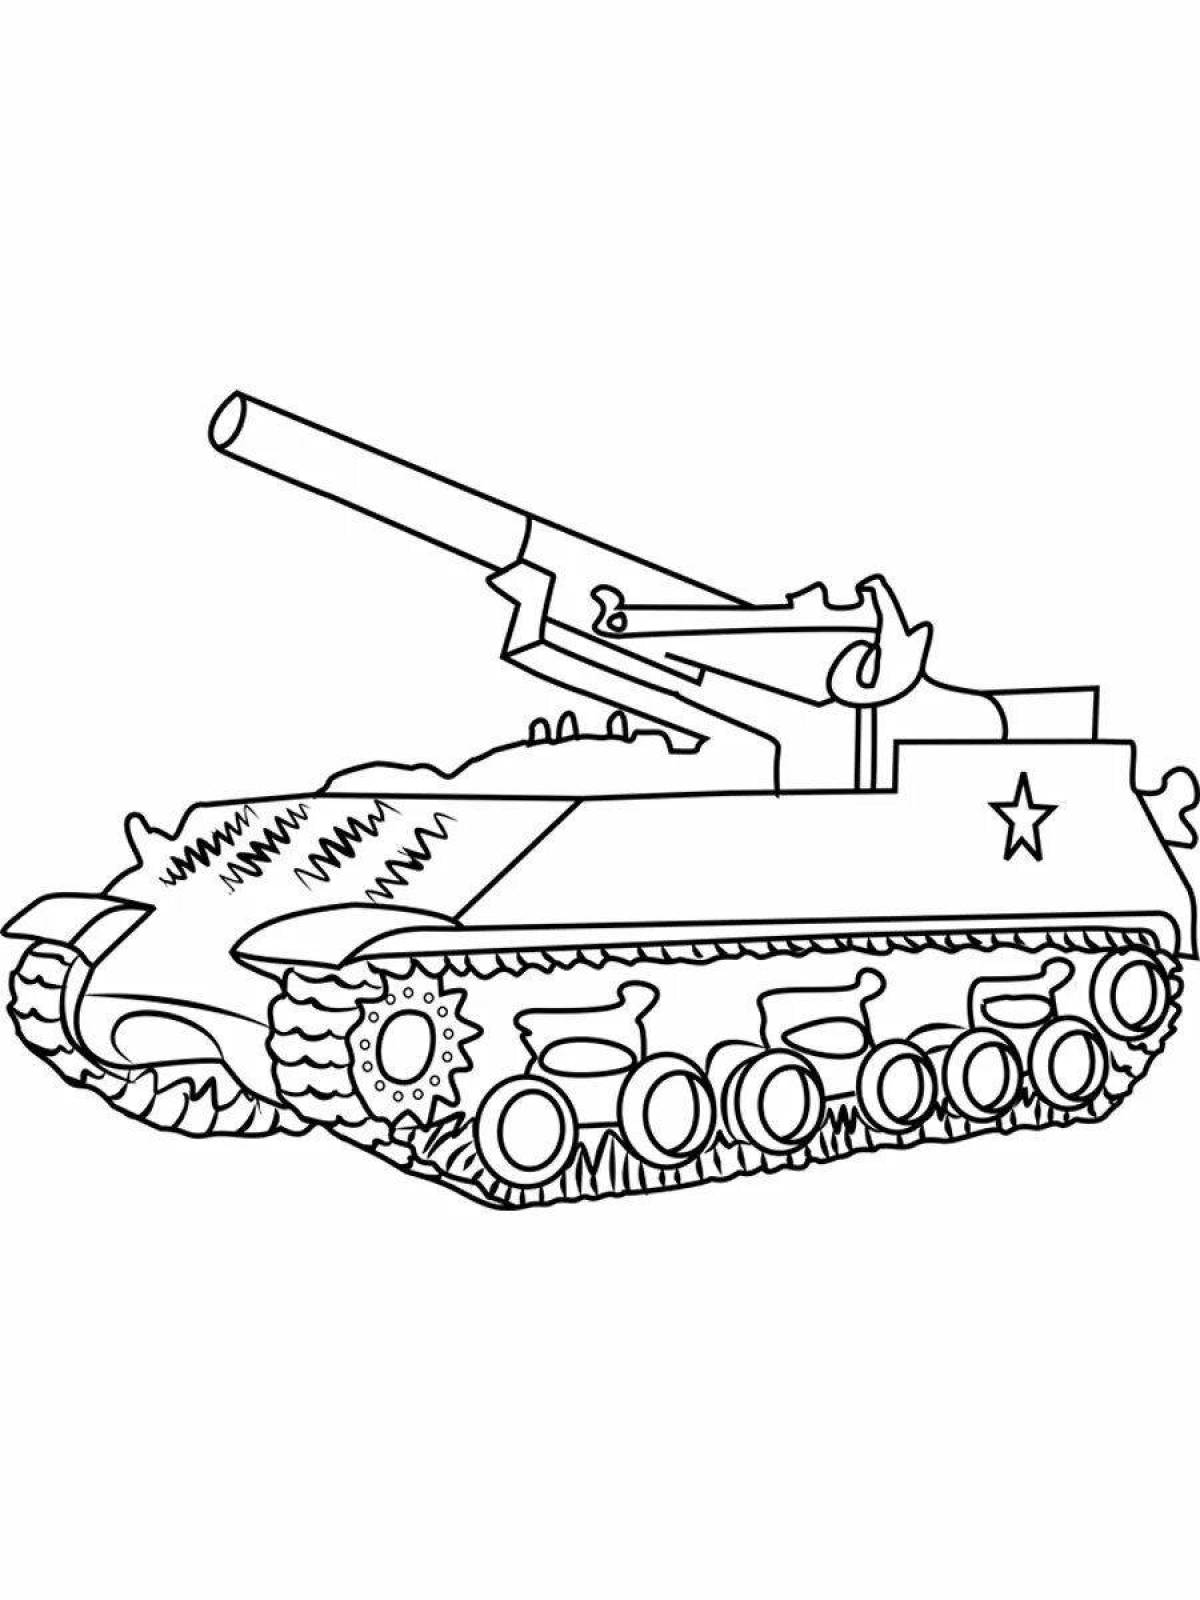 Kv44 outstanding tank coloring page